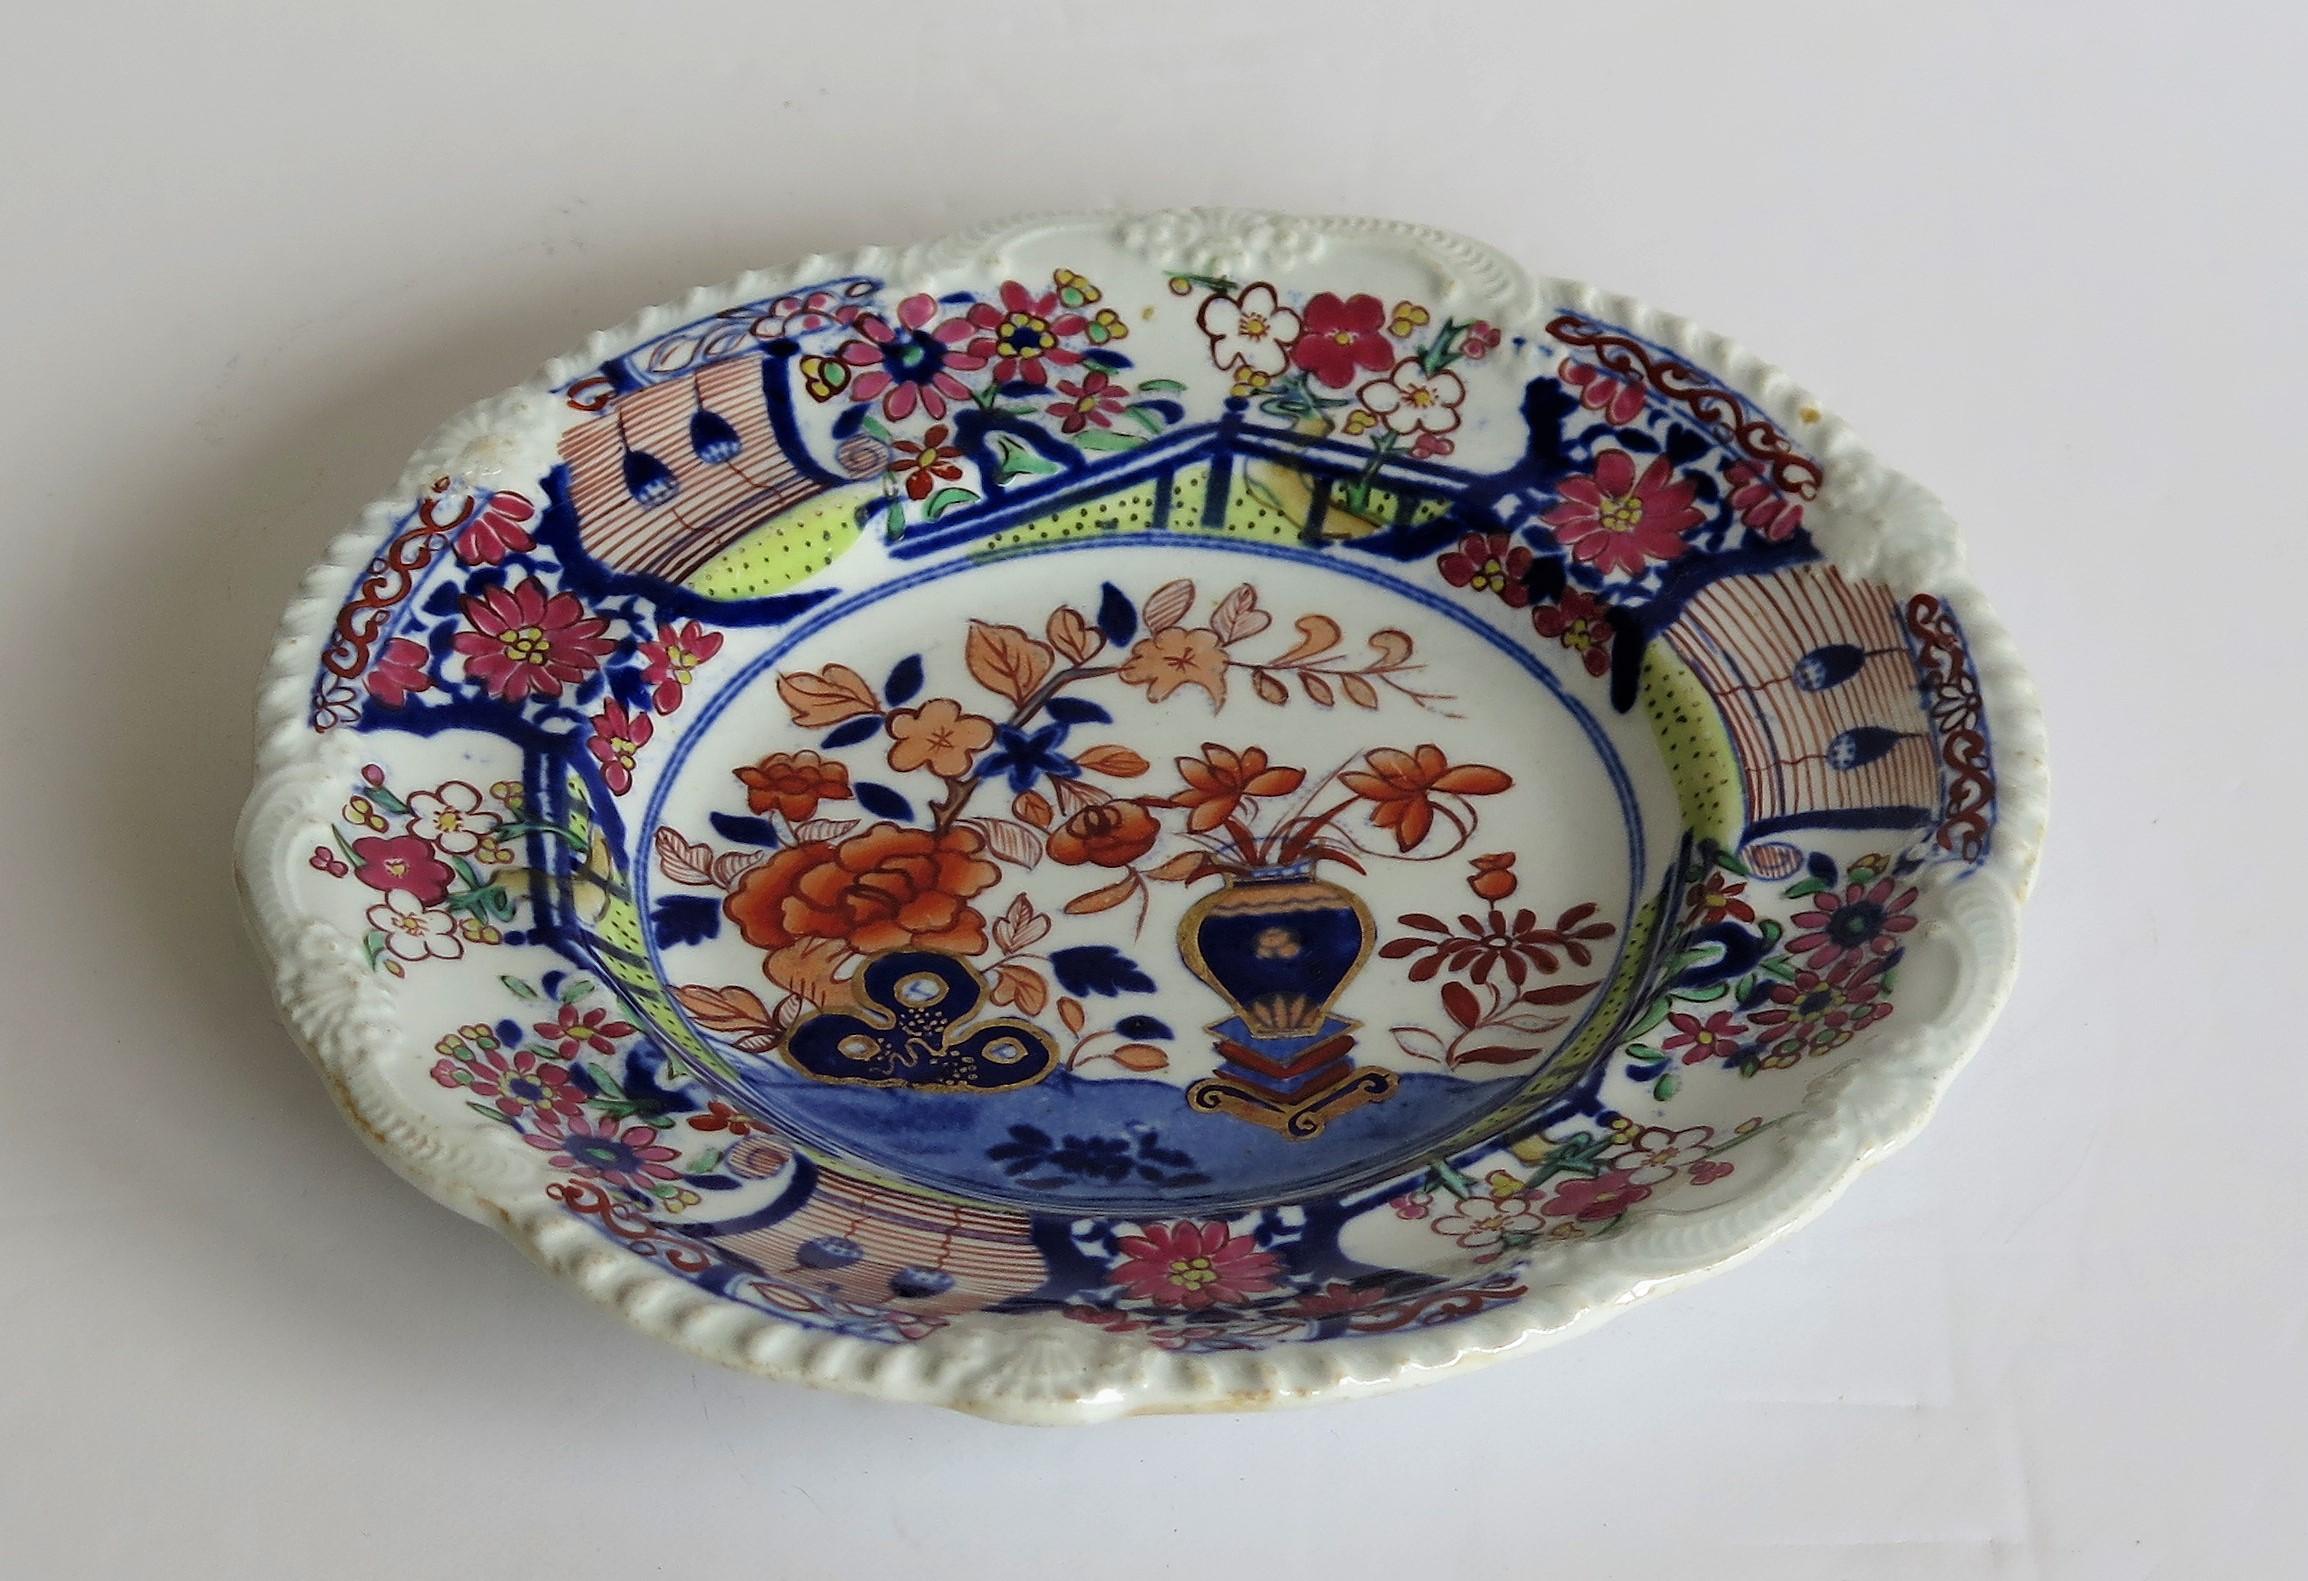 This is an early and very decorative ironstone pottery side plate or dish produced by the Mason's factory at Lane Delph, Staffordshire, England, circa 1815.

The plate is circular with an attractive pie crust edge moulding to the rim.

This